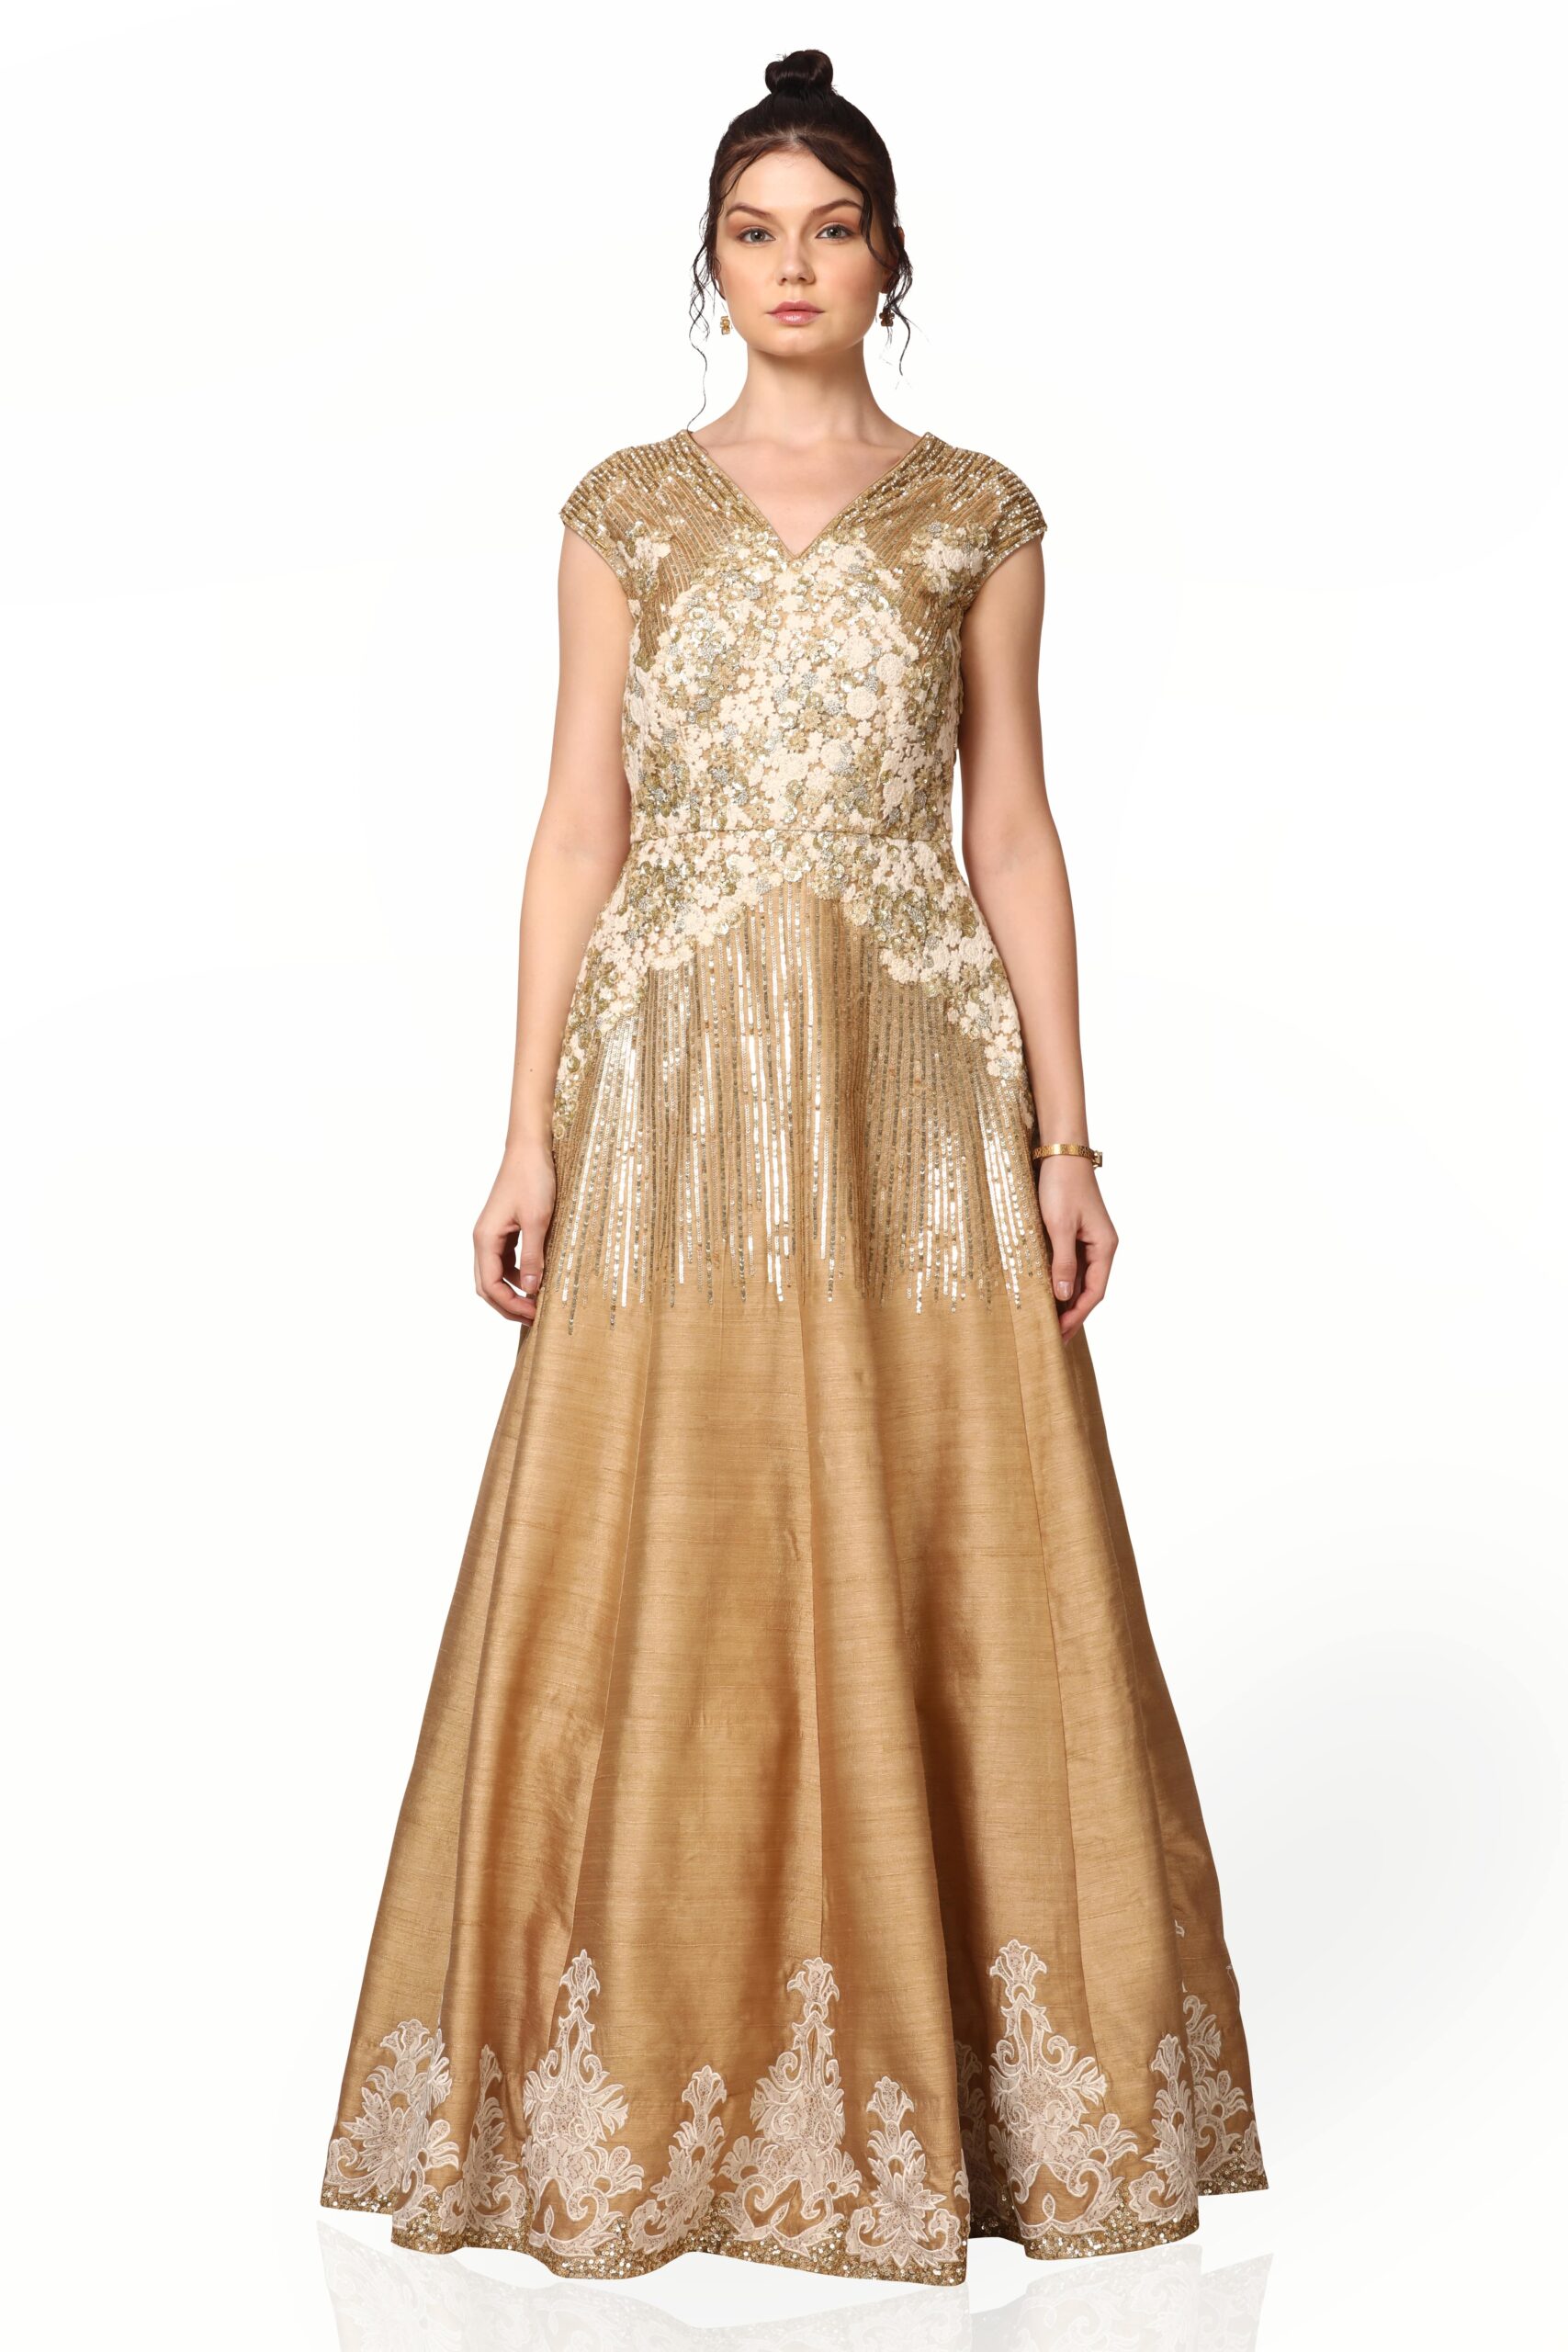 A tale of romance between lavish gold hues and dainty shimmer detailing.